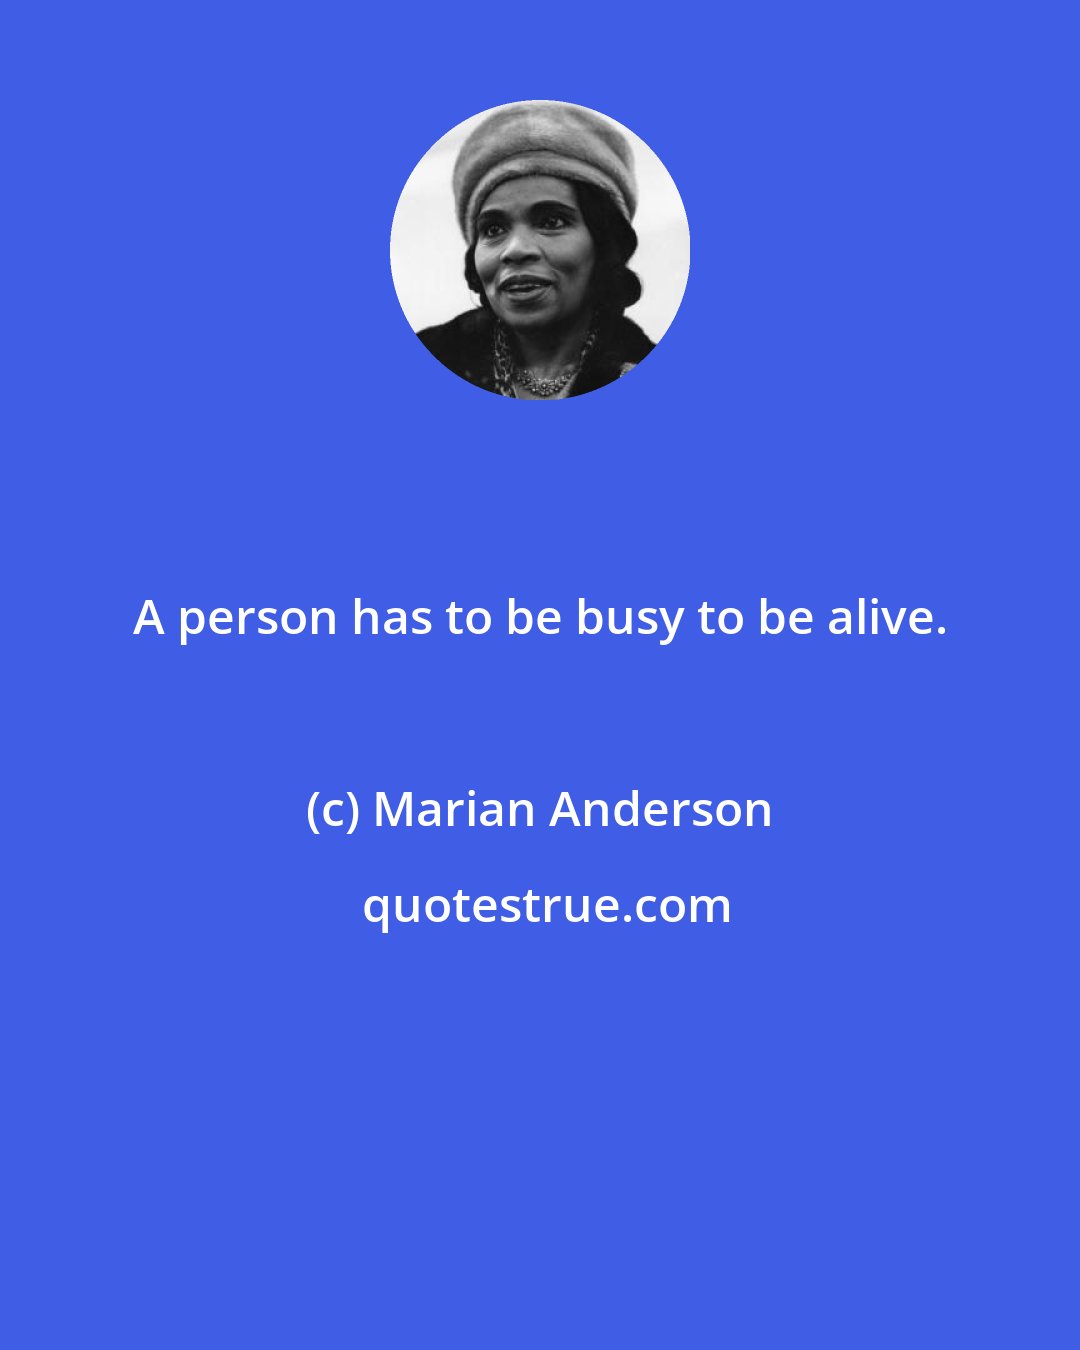 Marian Anderson: A person has to be busy to be alive.